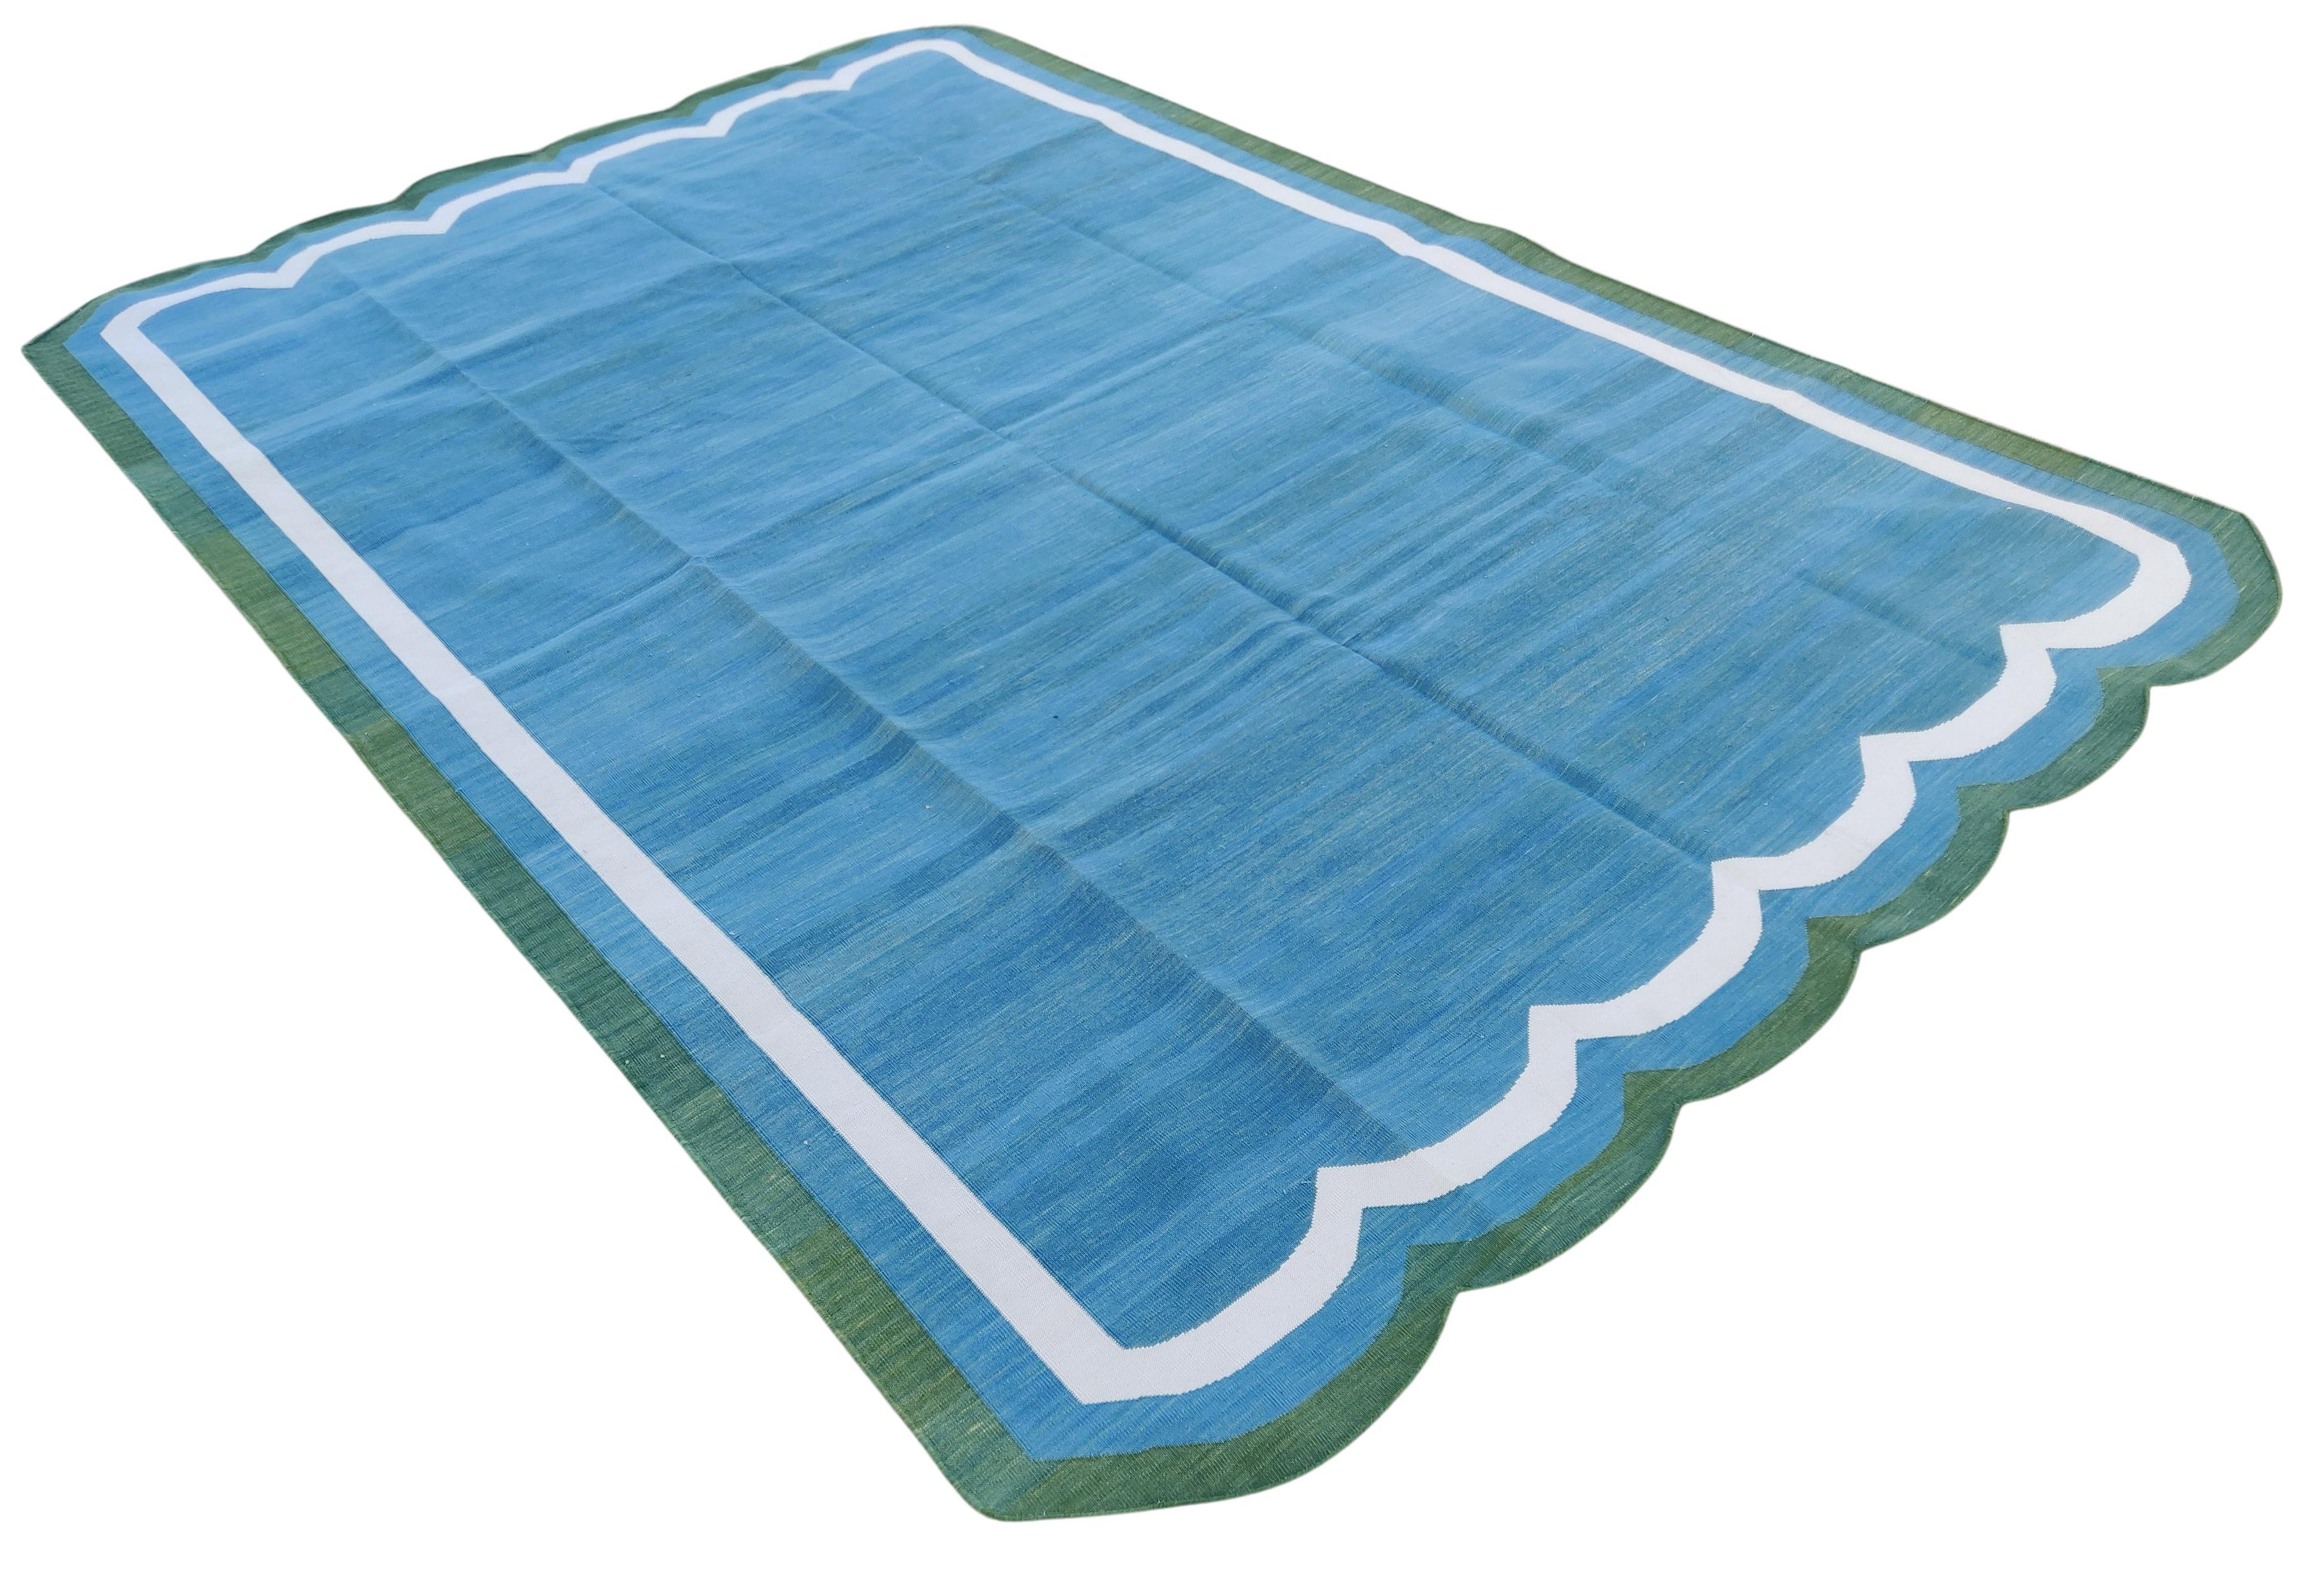 Cotton Vegetable Dyed Teal Blue And Forest Green Two Sided Scalloped Rug-6'x9' (Scallops runs on all 6' Sides)
These special flat-weave dhurries are hand-woven with 15 ply 100% cotton yarn. Due to the special manufacturing techniques used to create